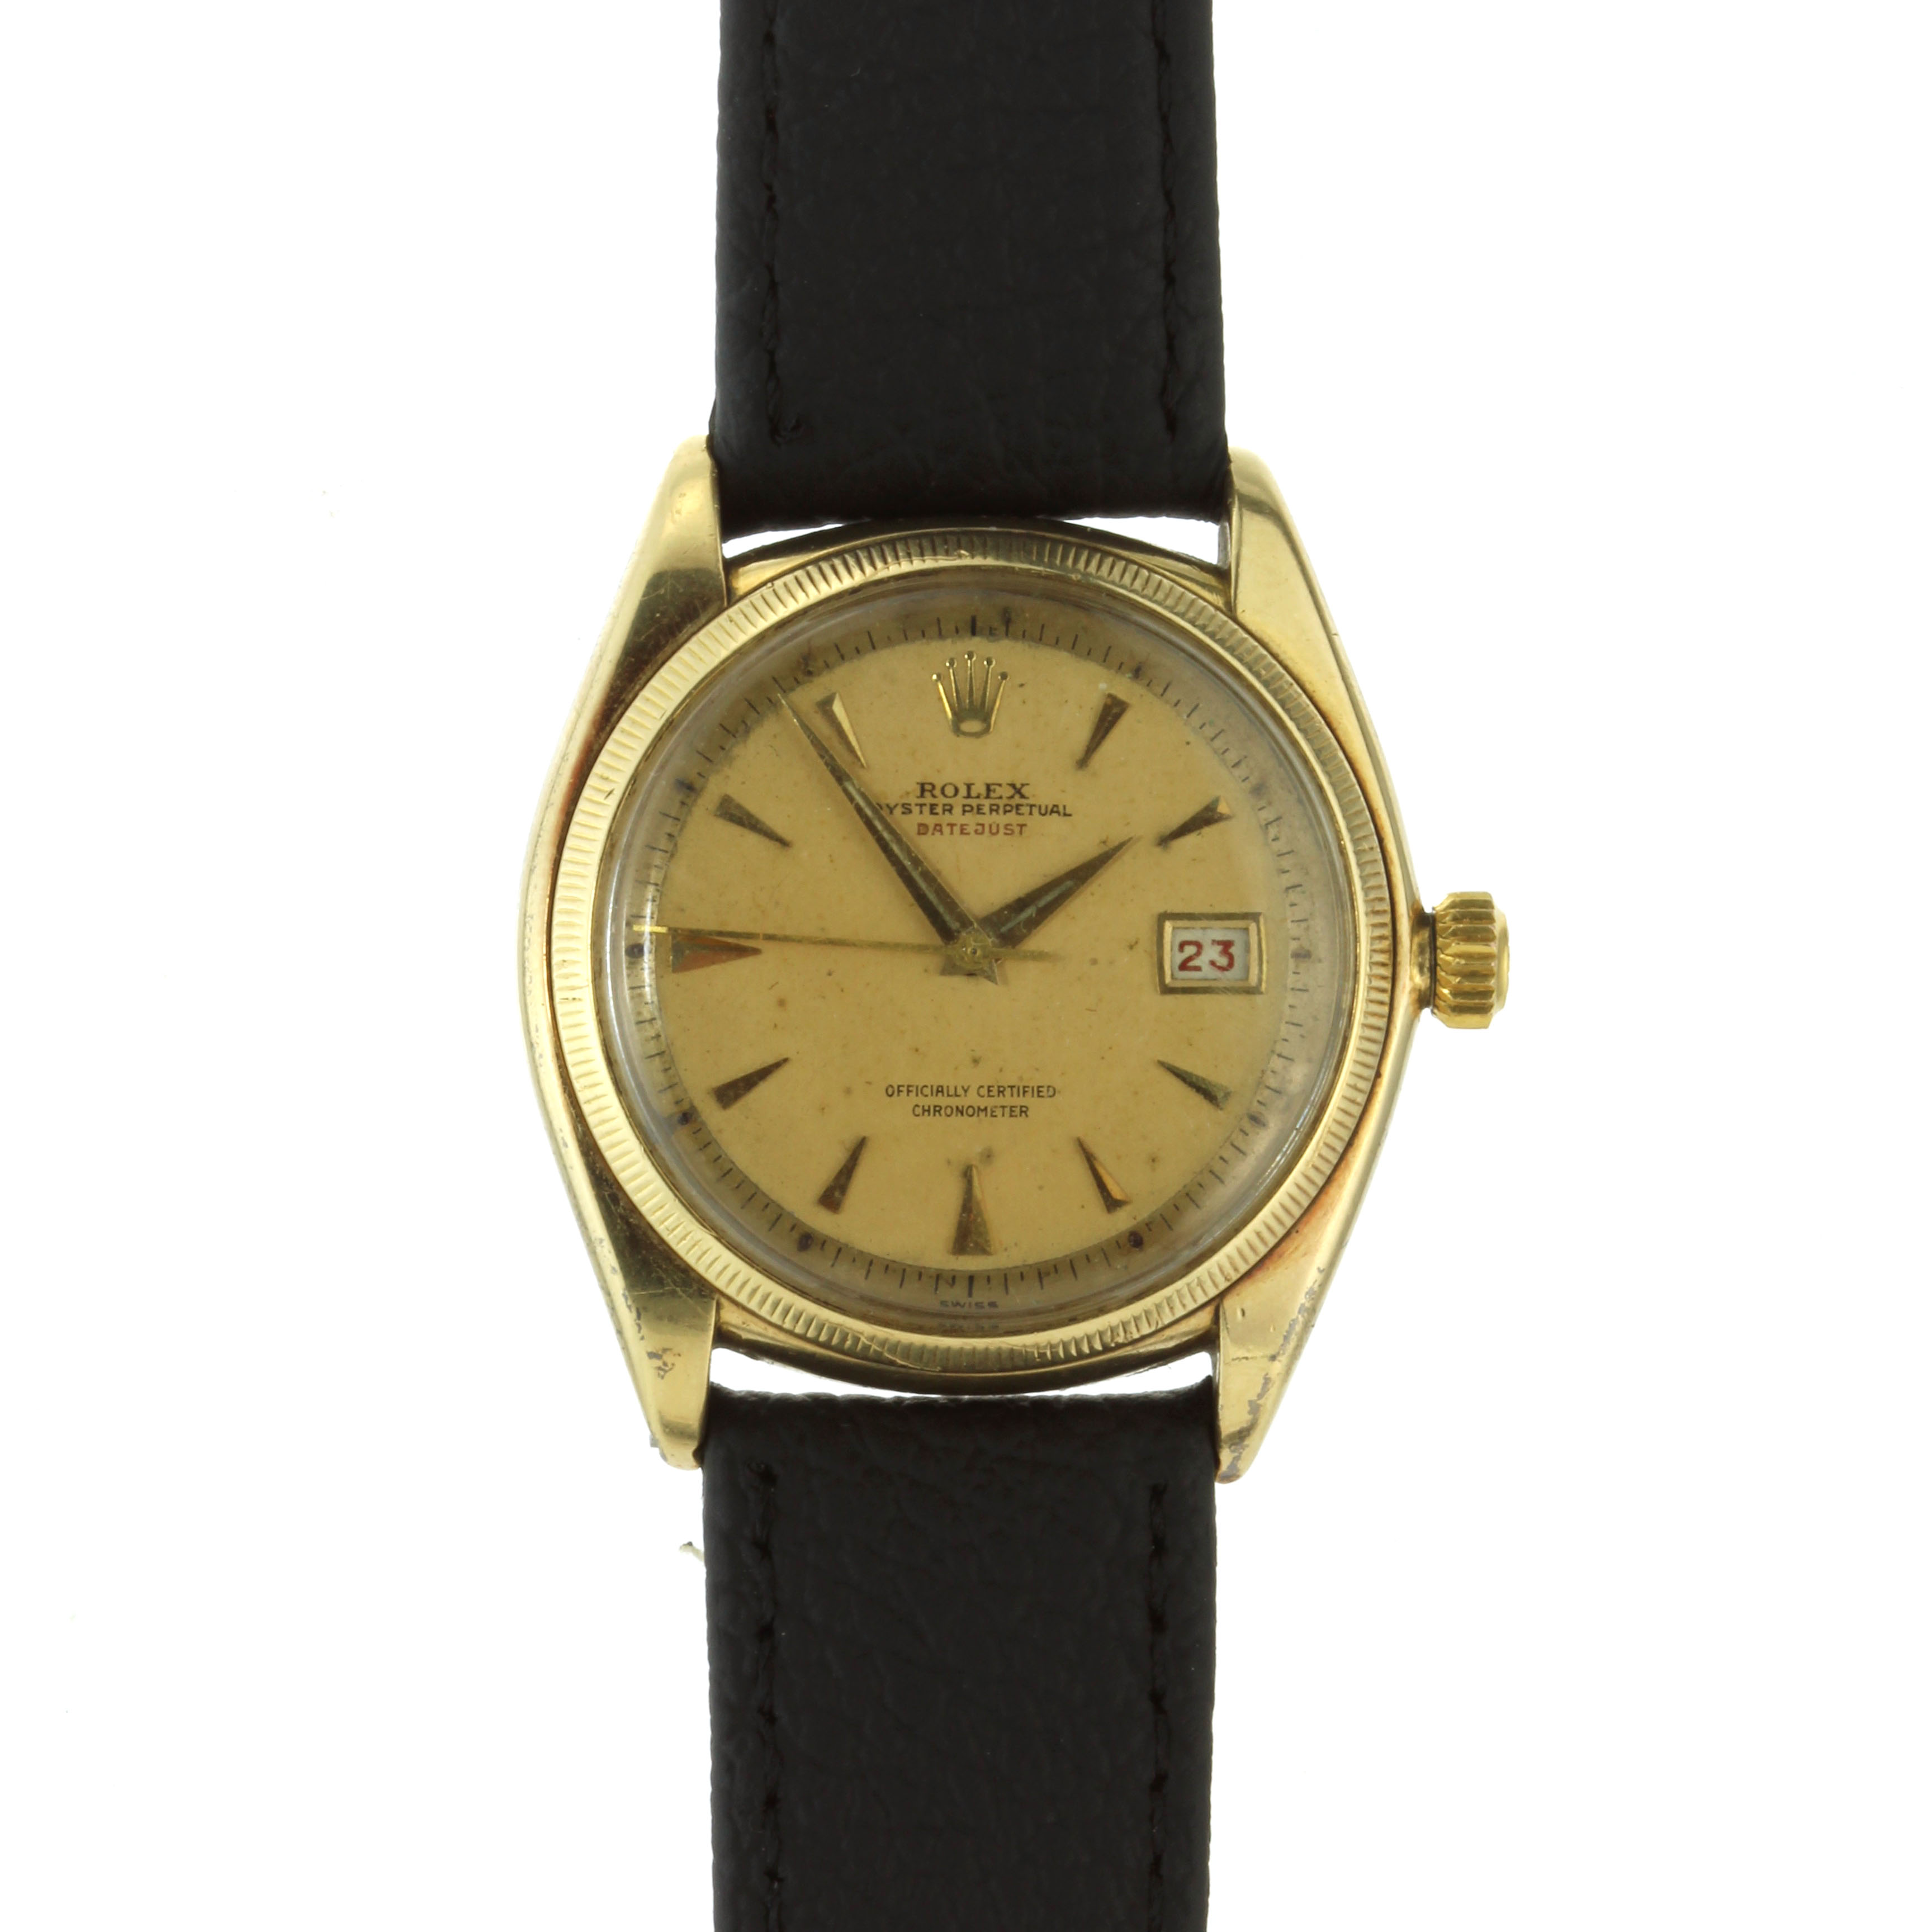 A VINTAGE ROLEX OYSTER PERPETUAL DATEJUST 'BIG BUBBLE' WRIST WATCH, CIRCA 1965 in 18ct yellow